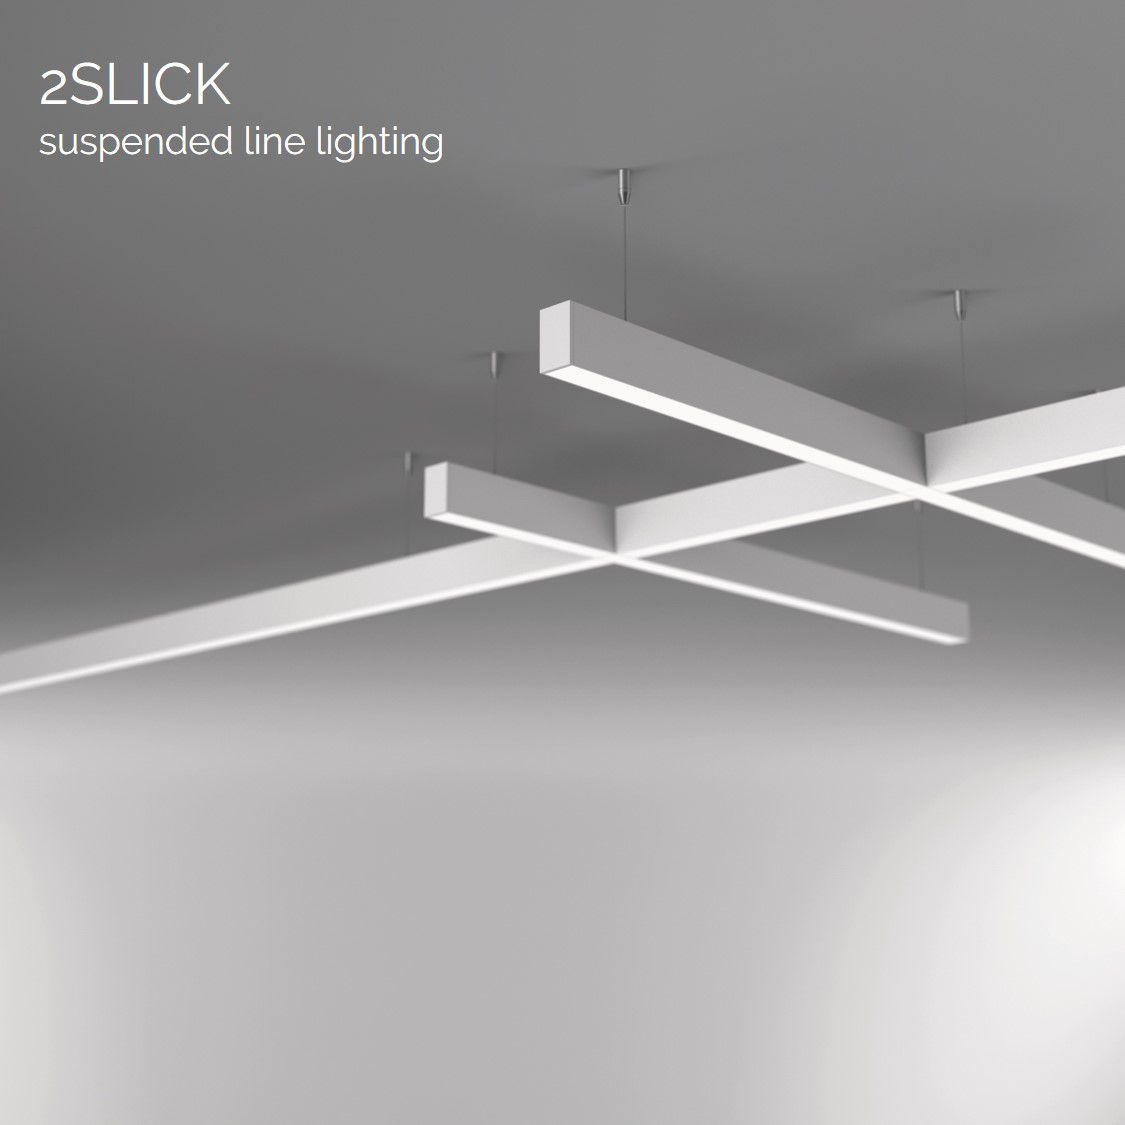 2slick small line suspended line lighting end 2400x40x65mm 3000k 3549lm 40w dali